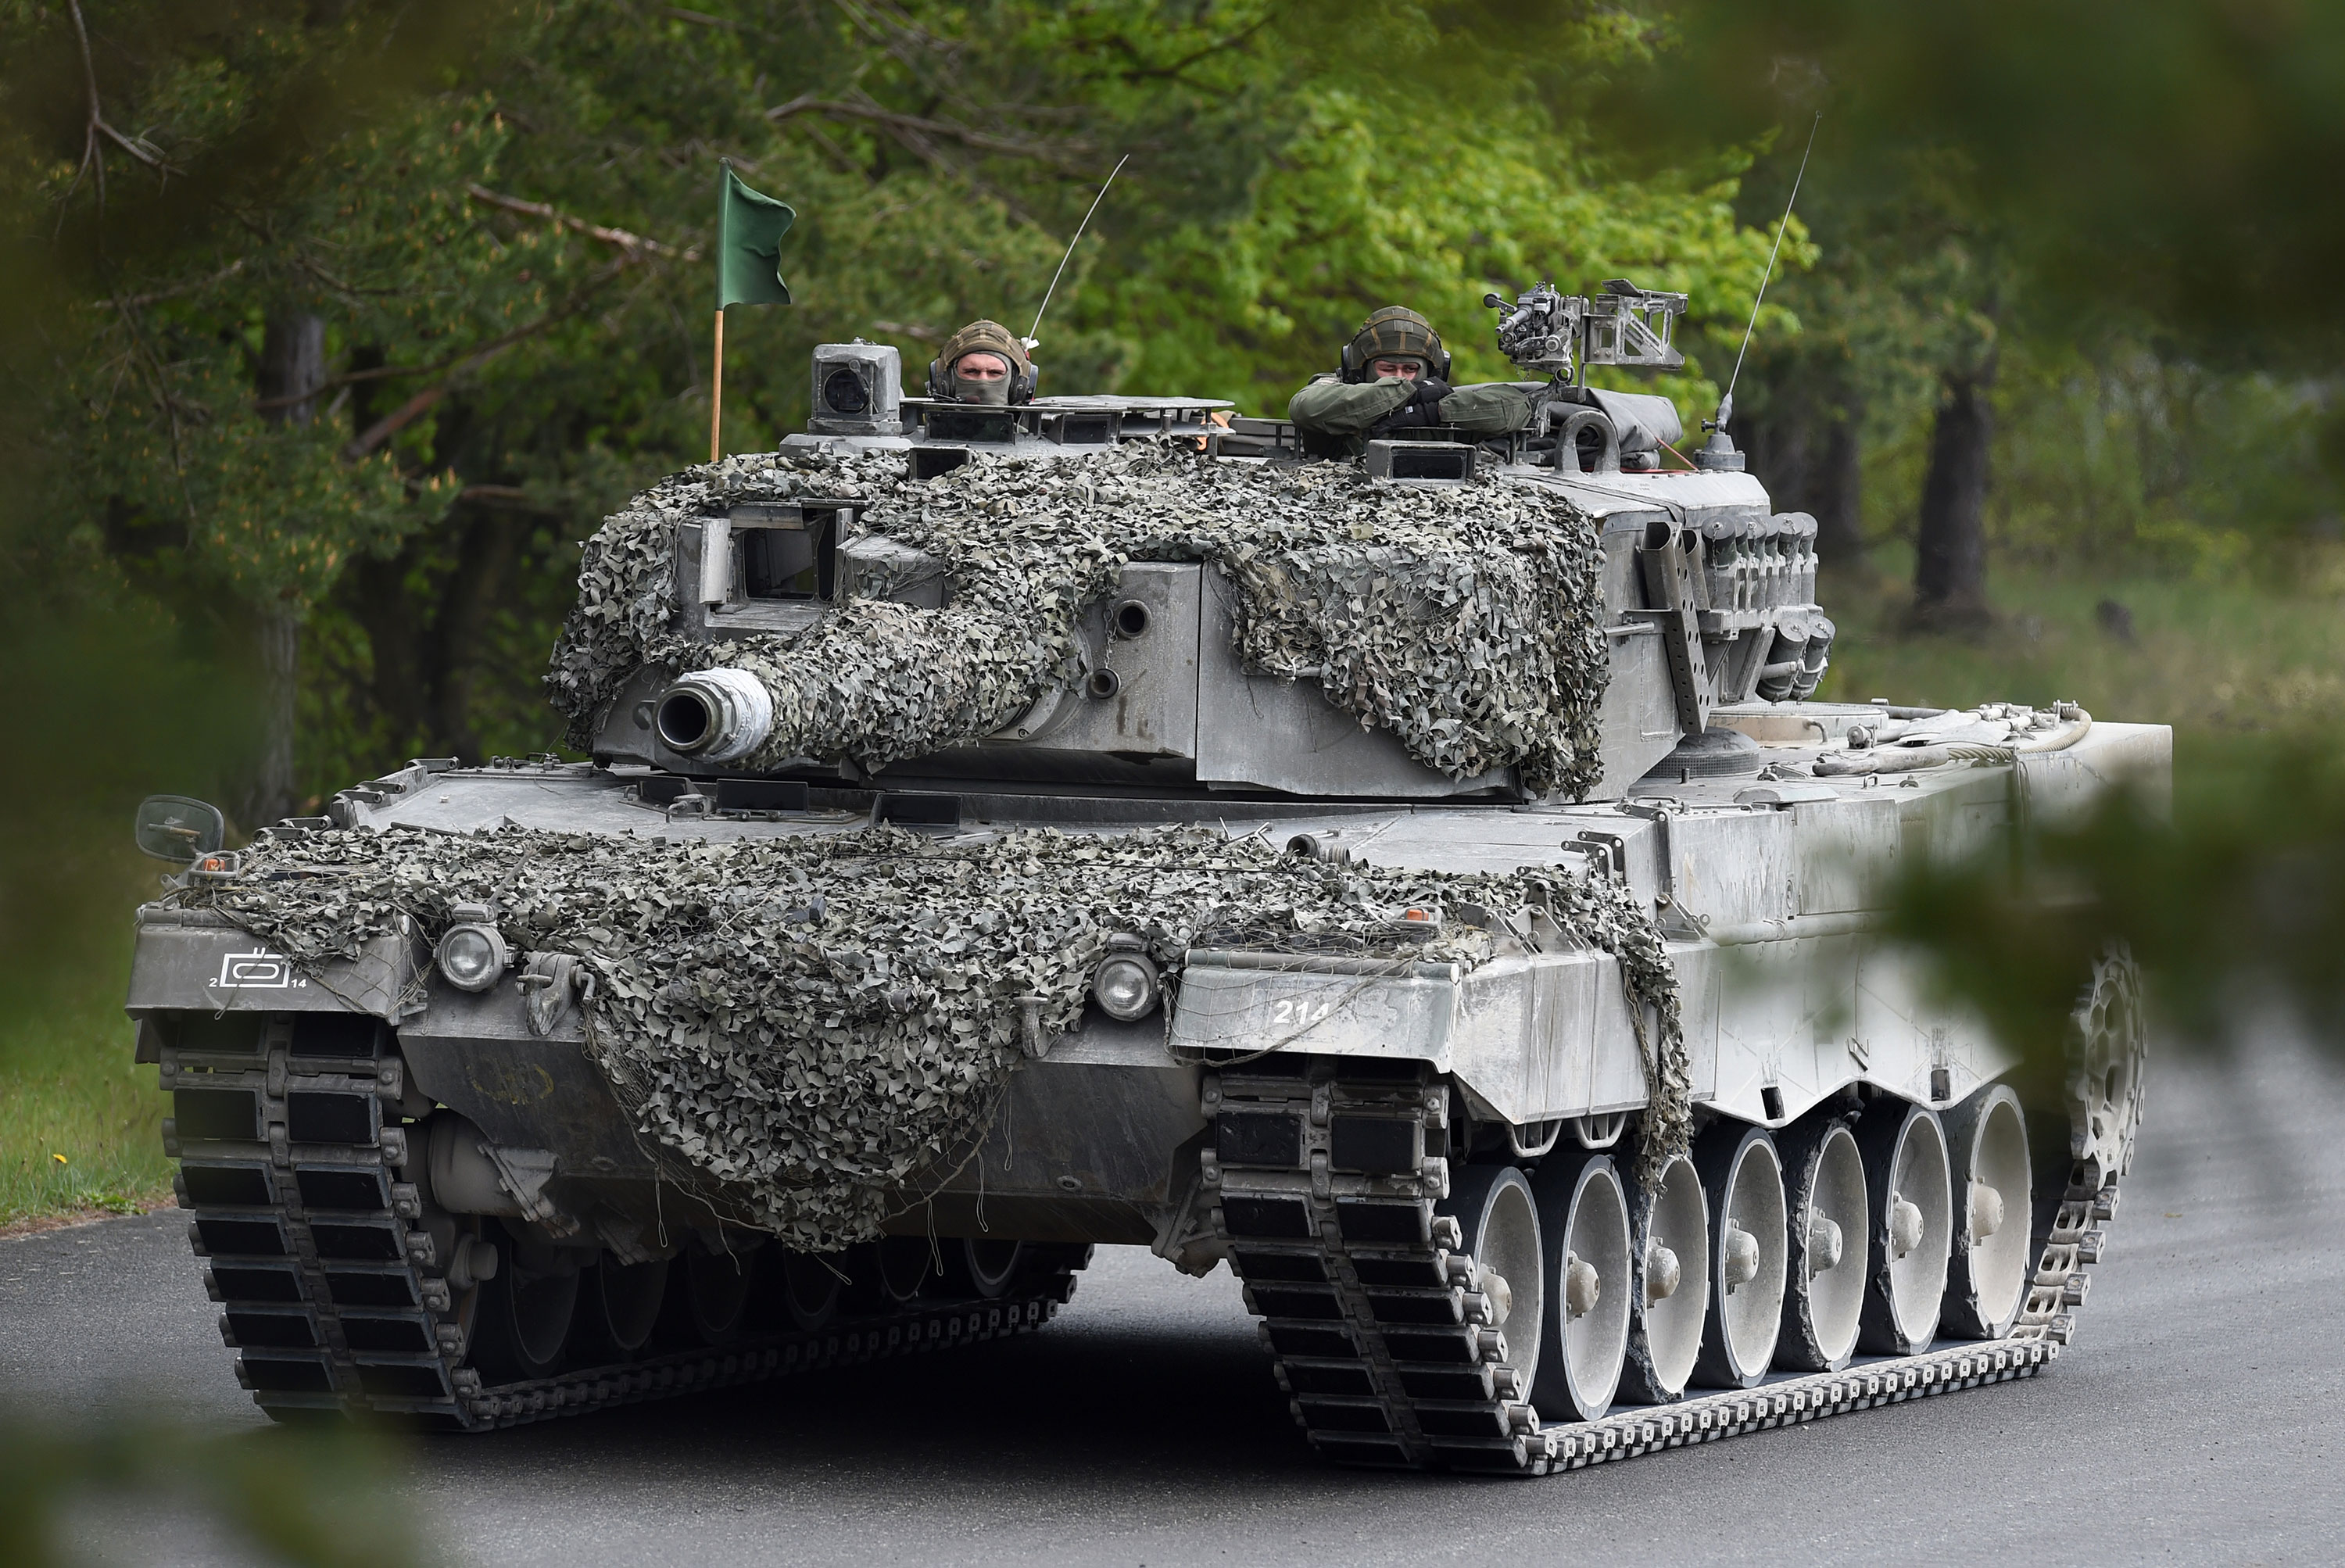 Austrian soldiers drive a Leopard tank at a military exercise in Grafenwoehr, Germany, in 2017.